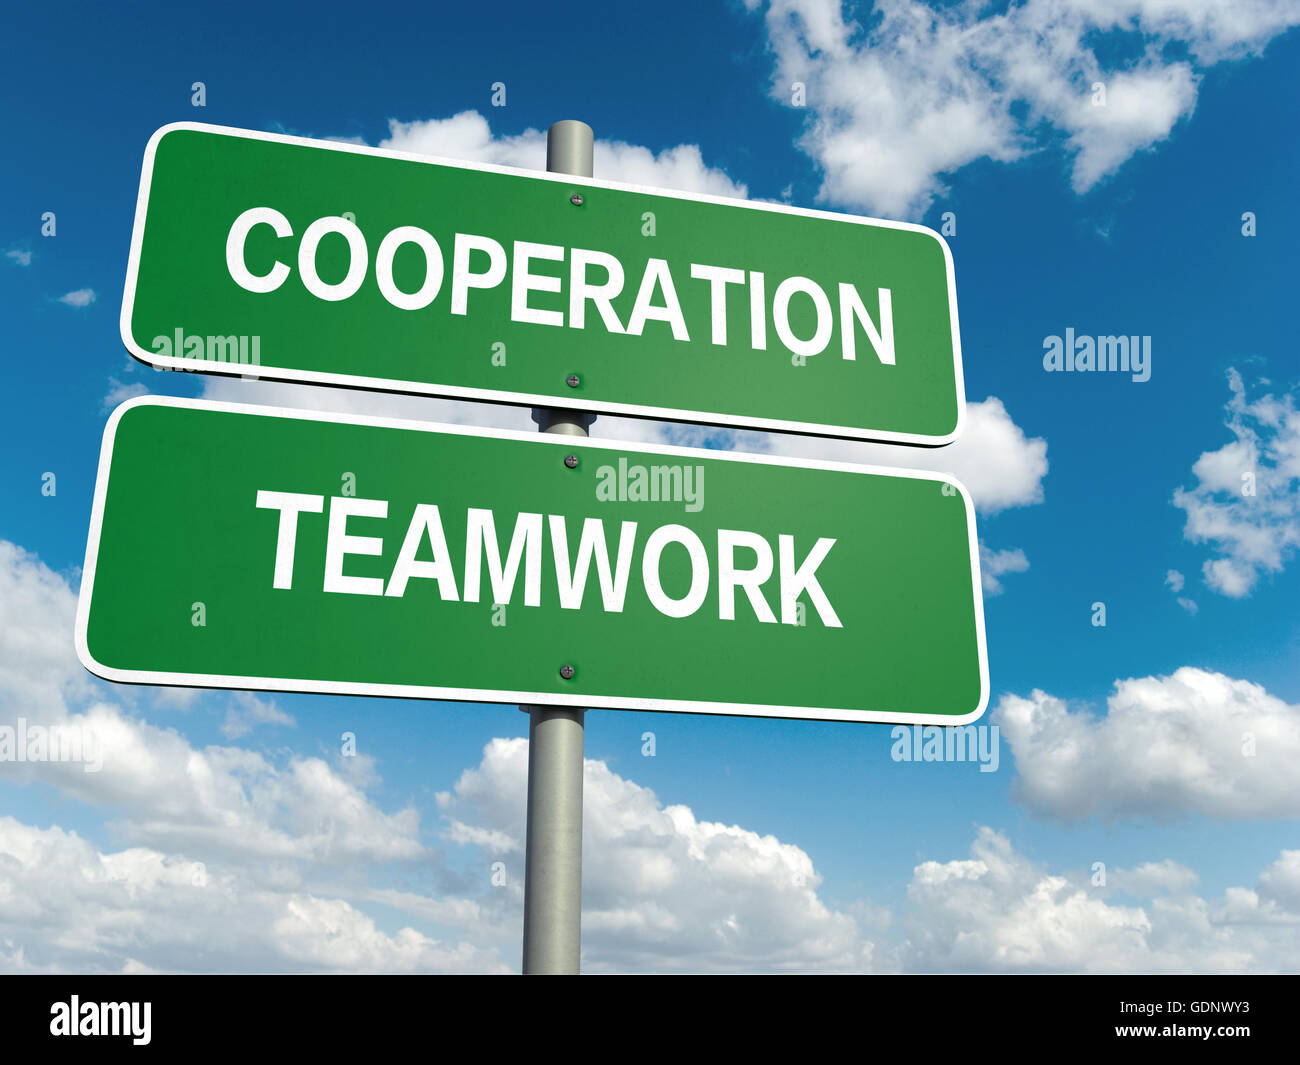 A road sign with cooperation teamwork words on sky background Stock Photo